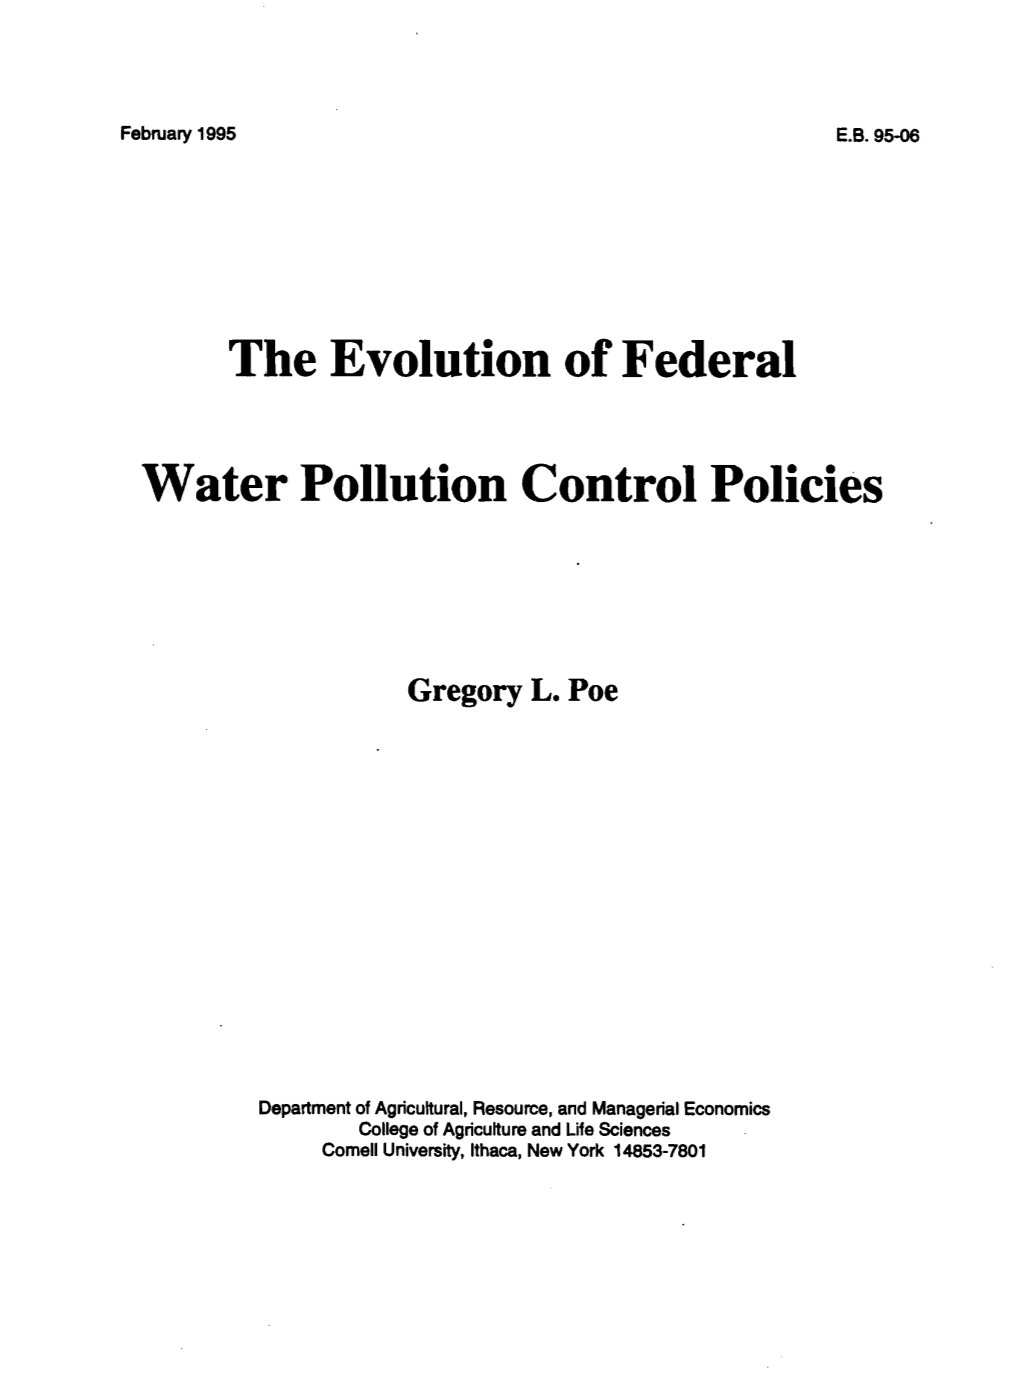 The Evolution of Federal Water Pollution Control Policies ! (With Emphasis on Agricultural and Nonpoint Source Pollution Measures)